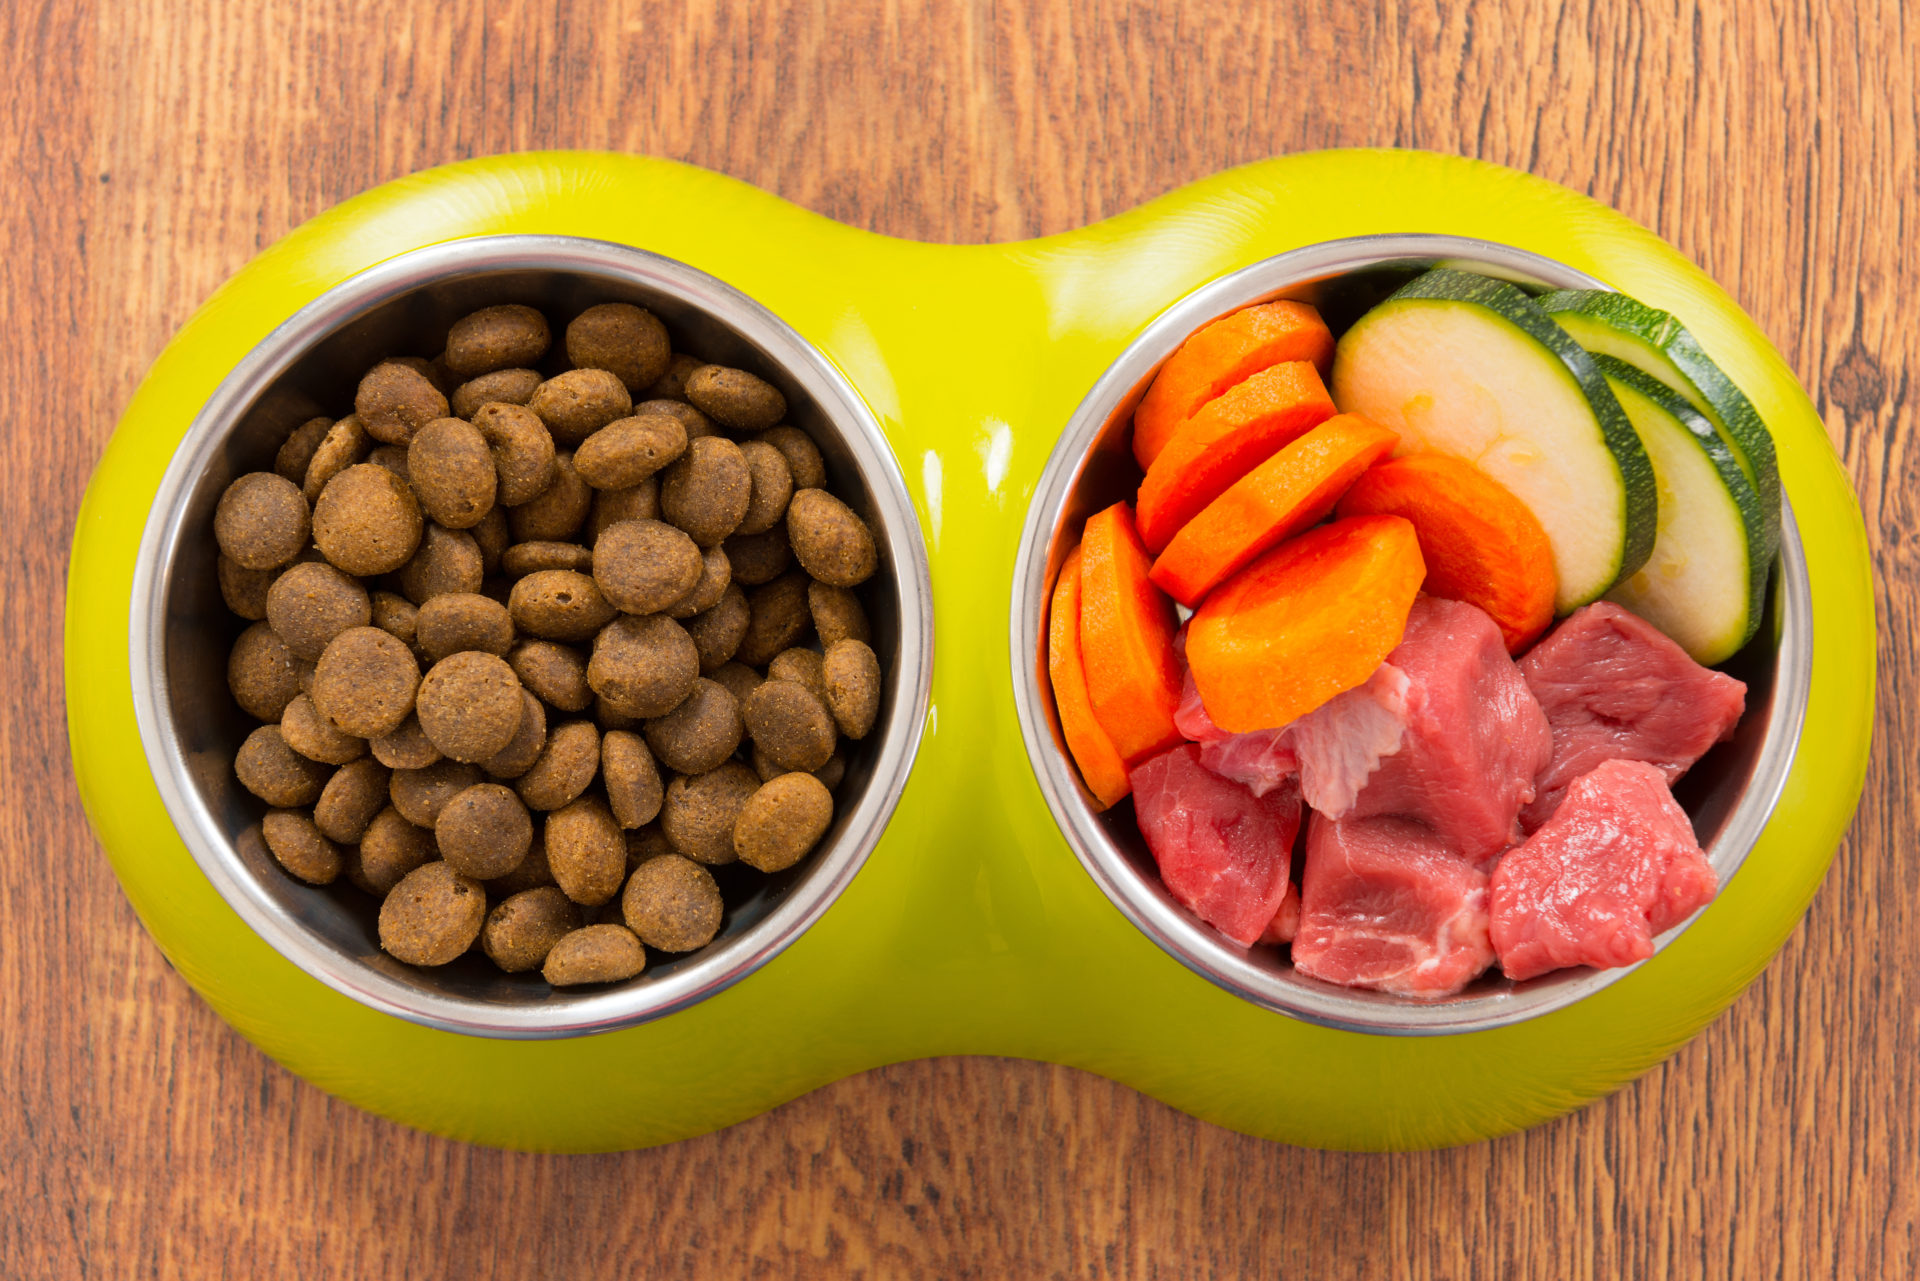 Meals for Dogs